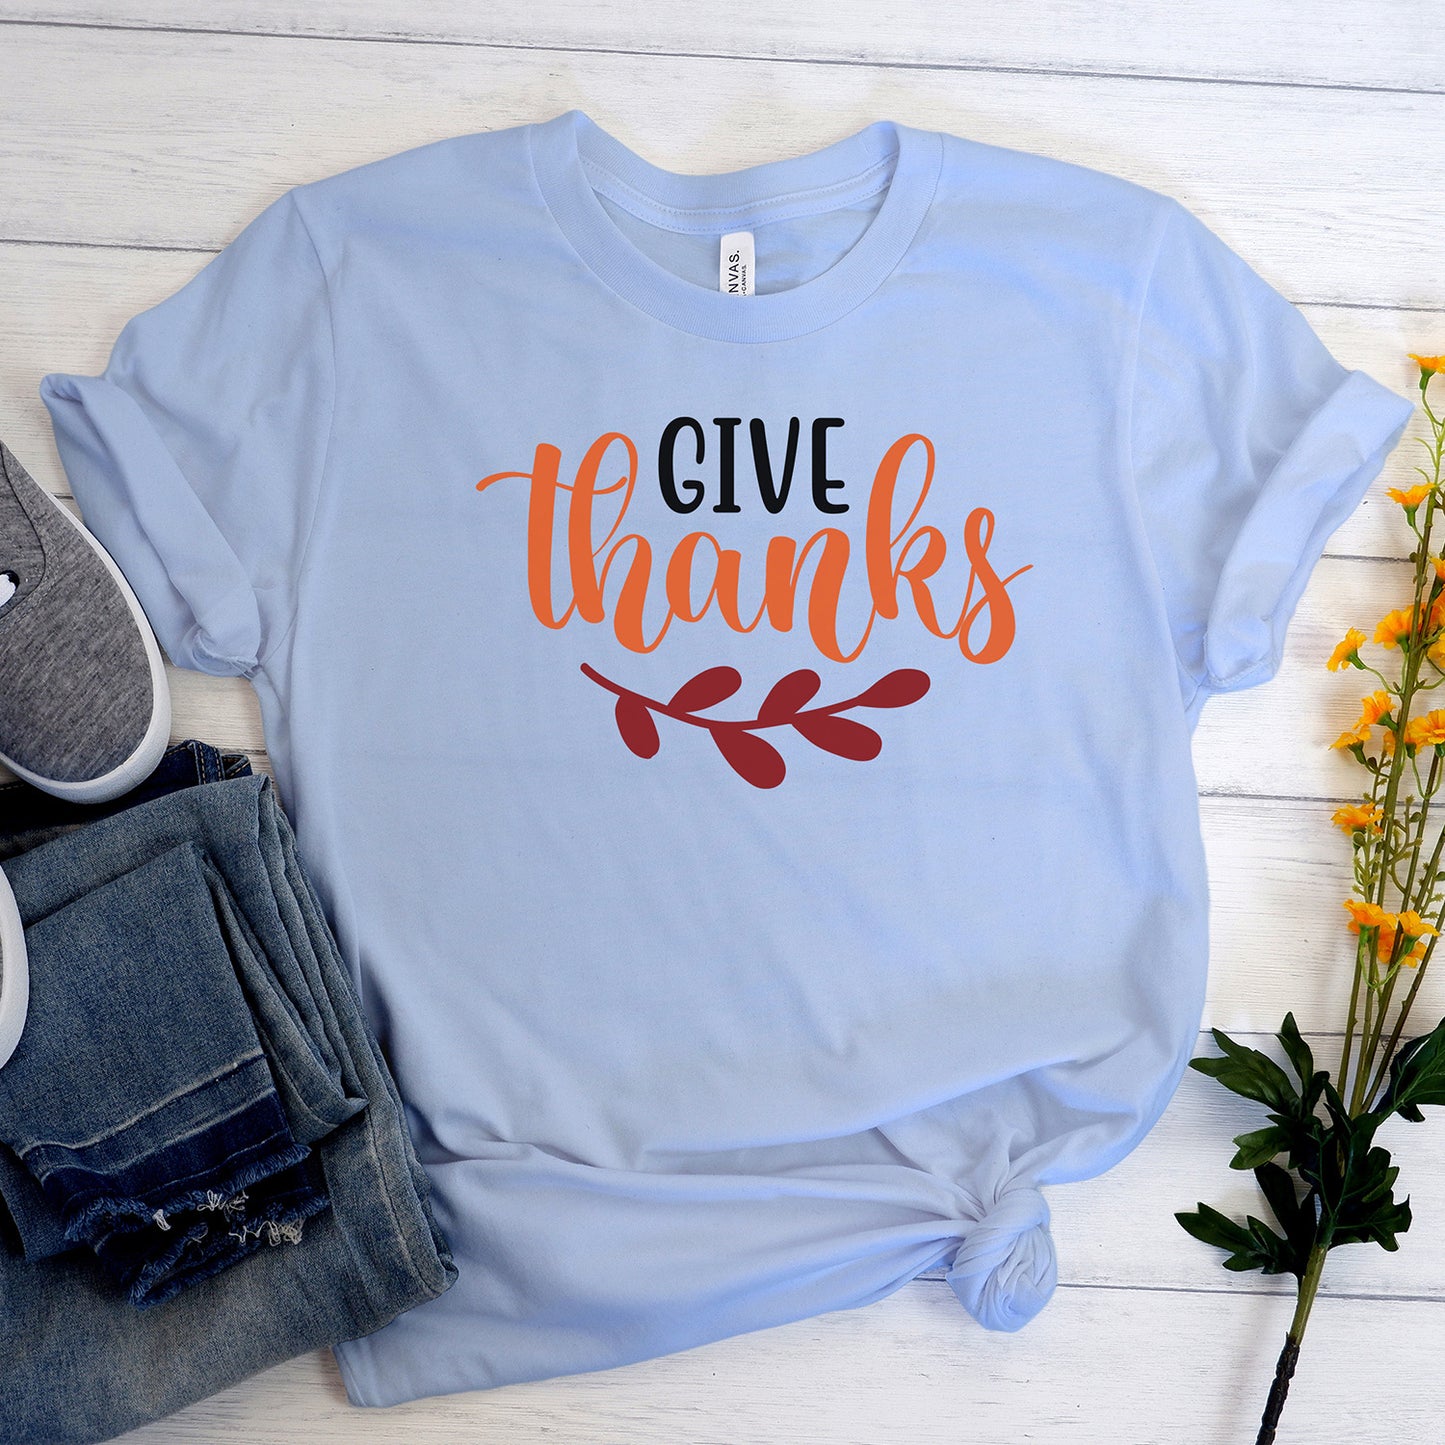 "Give Thanks" Graphic